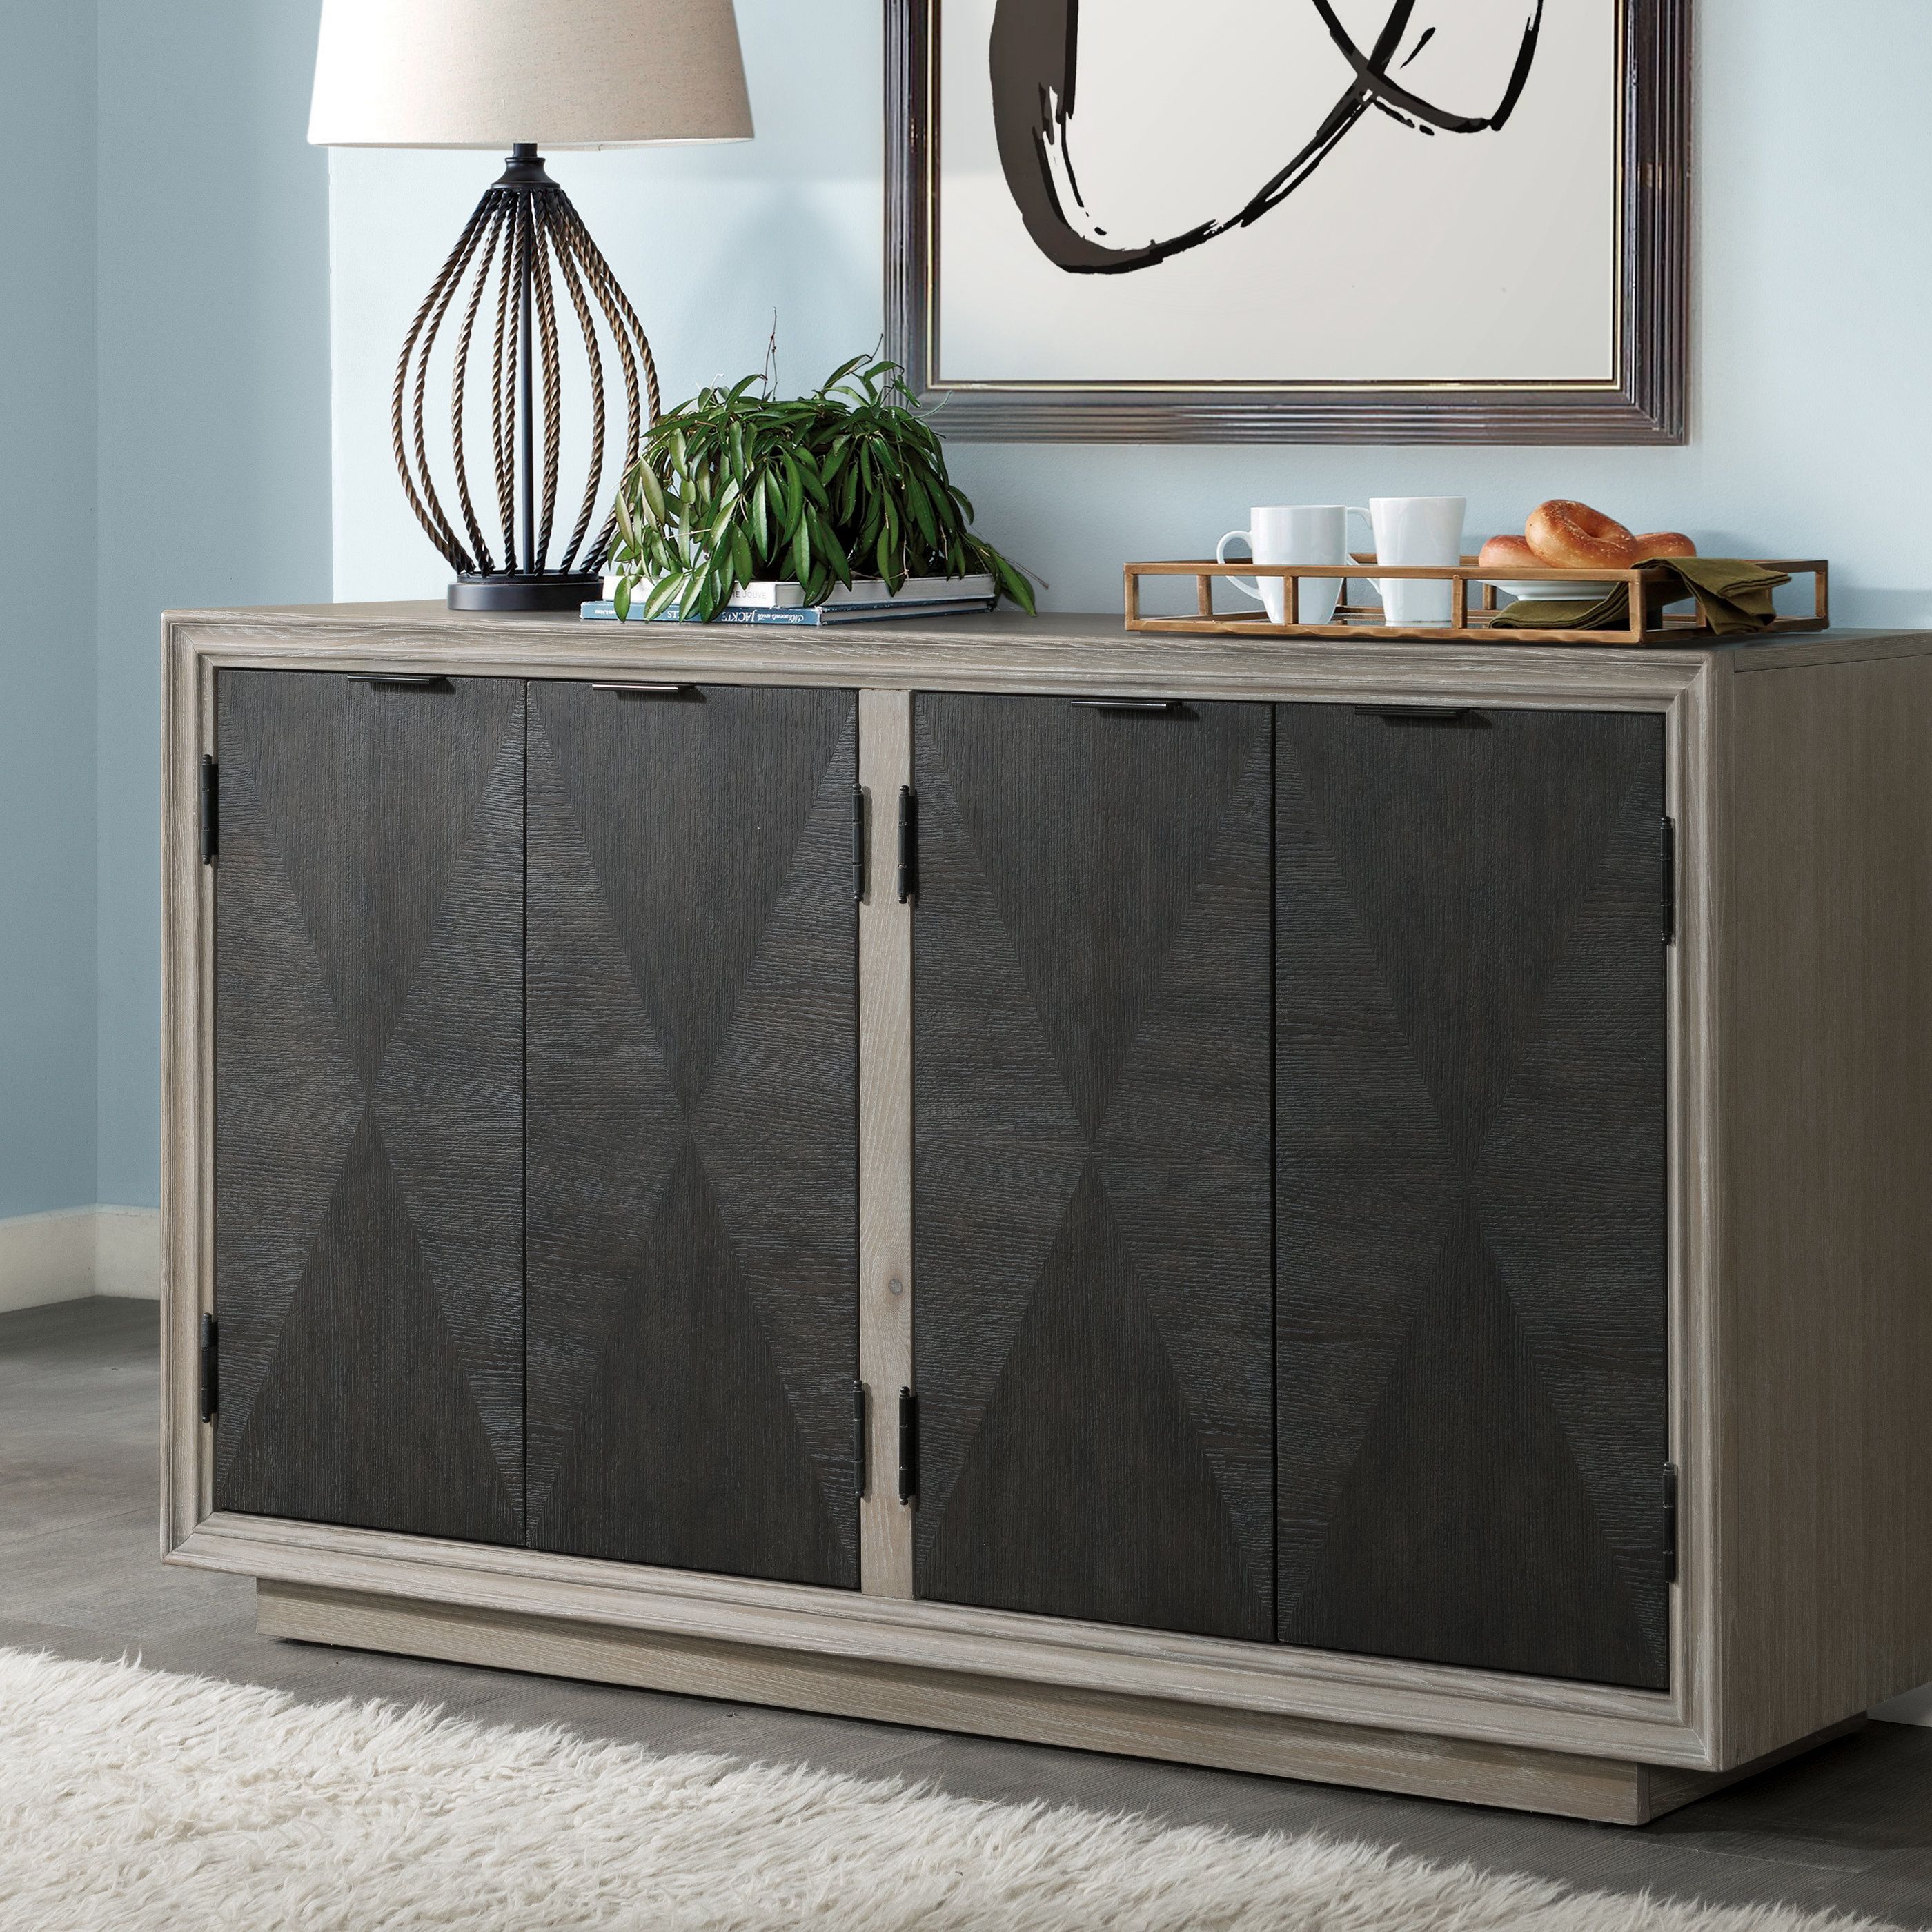 Hoover Four Door Duotone Parquet Sideboard For Current Massillon Sideboards (View 11 of 20)